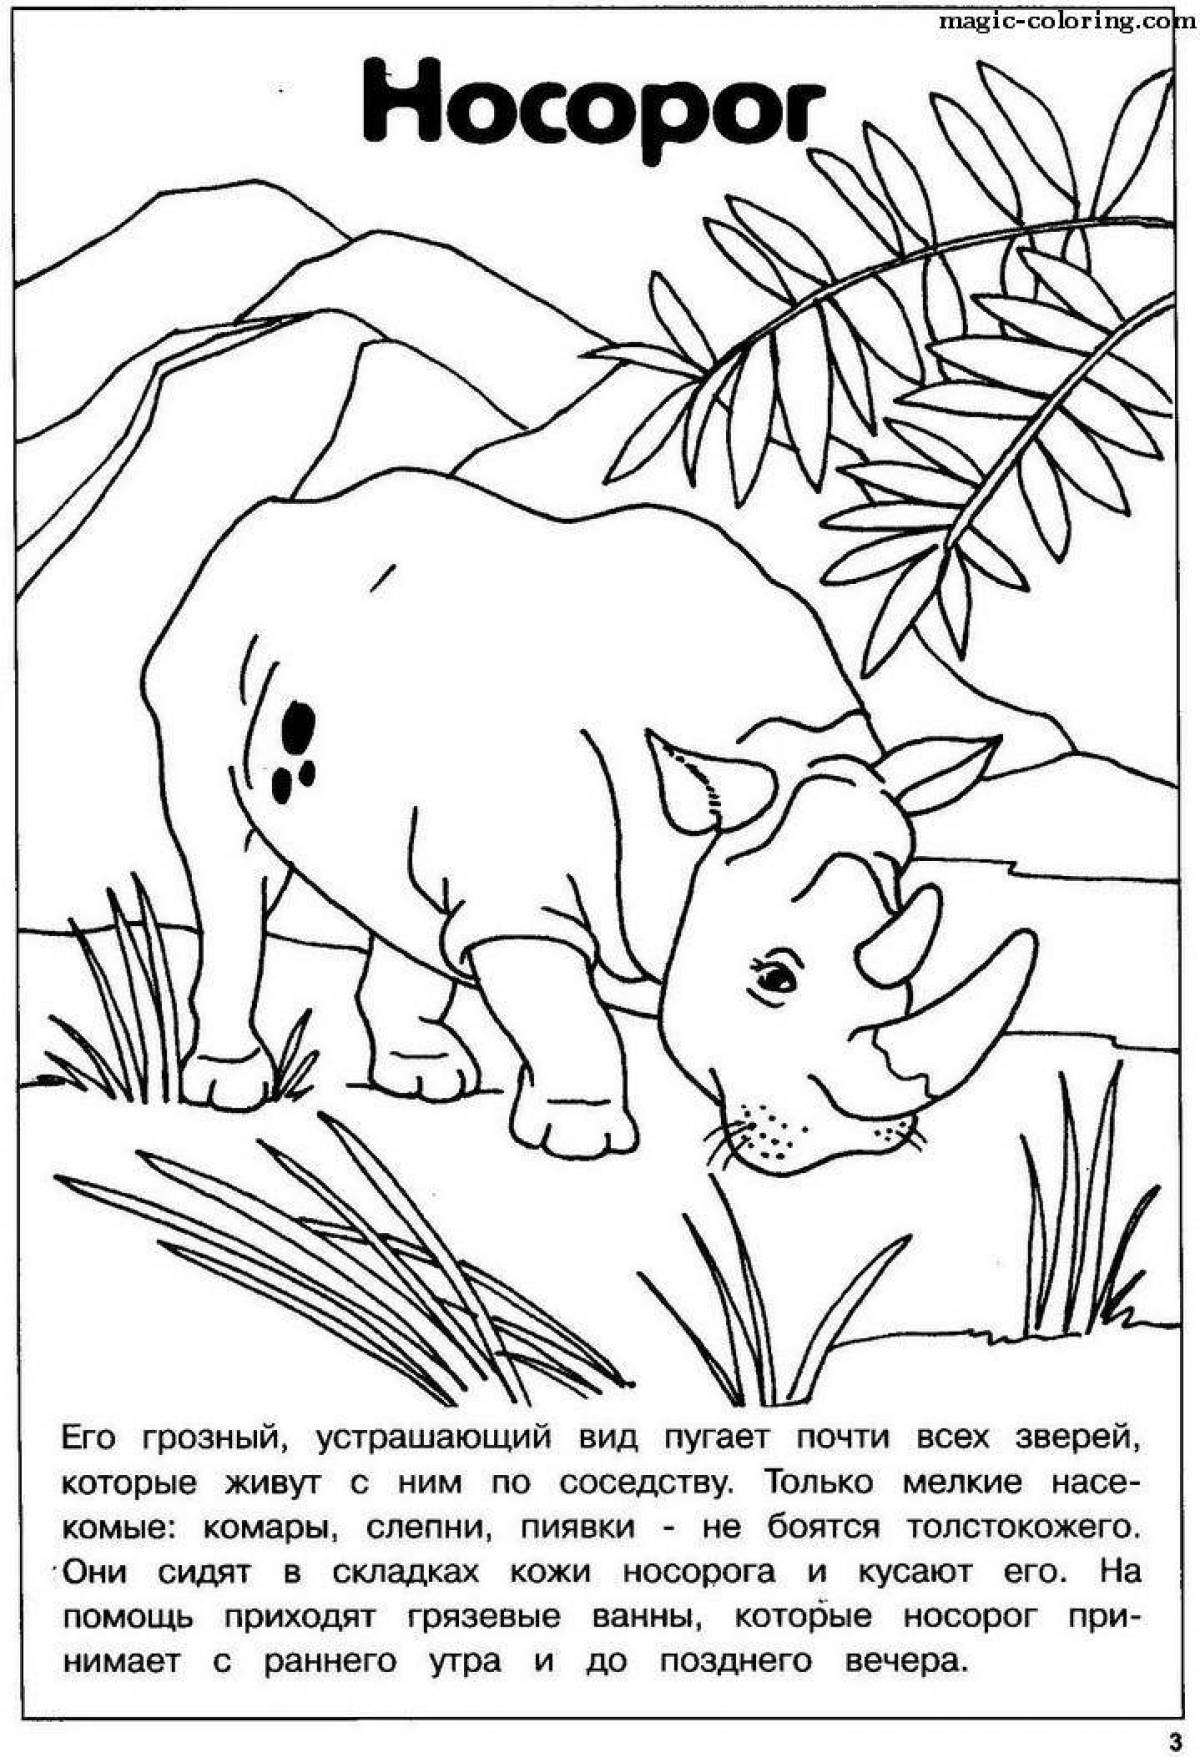 Bright red animal coloring book